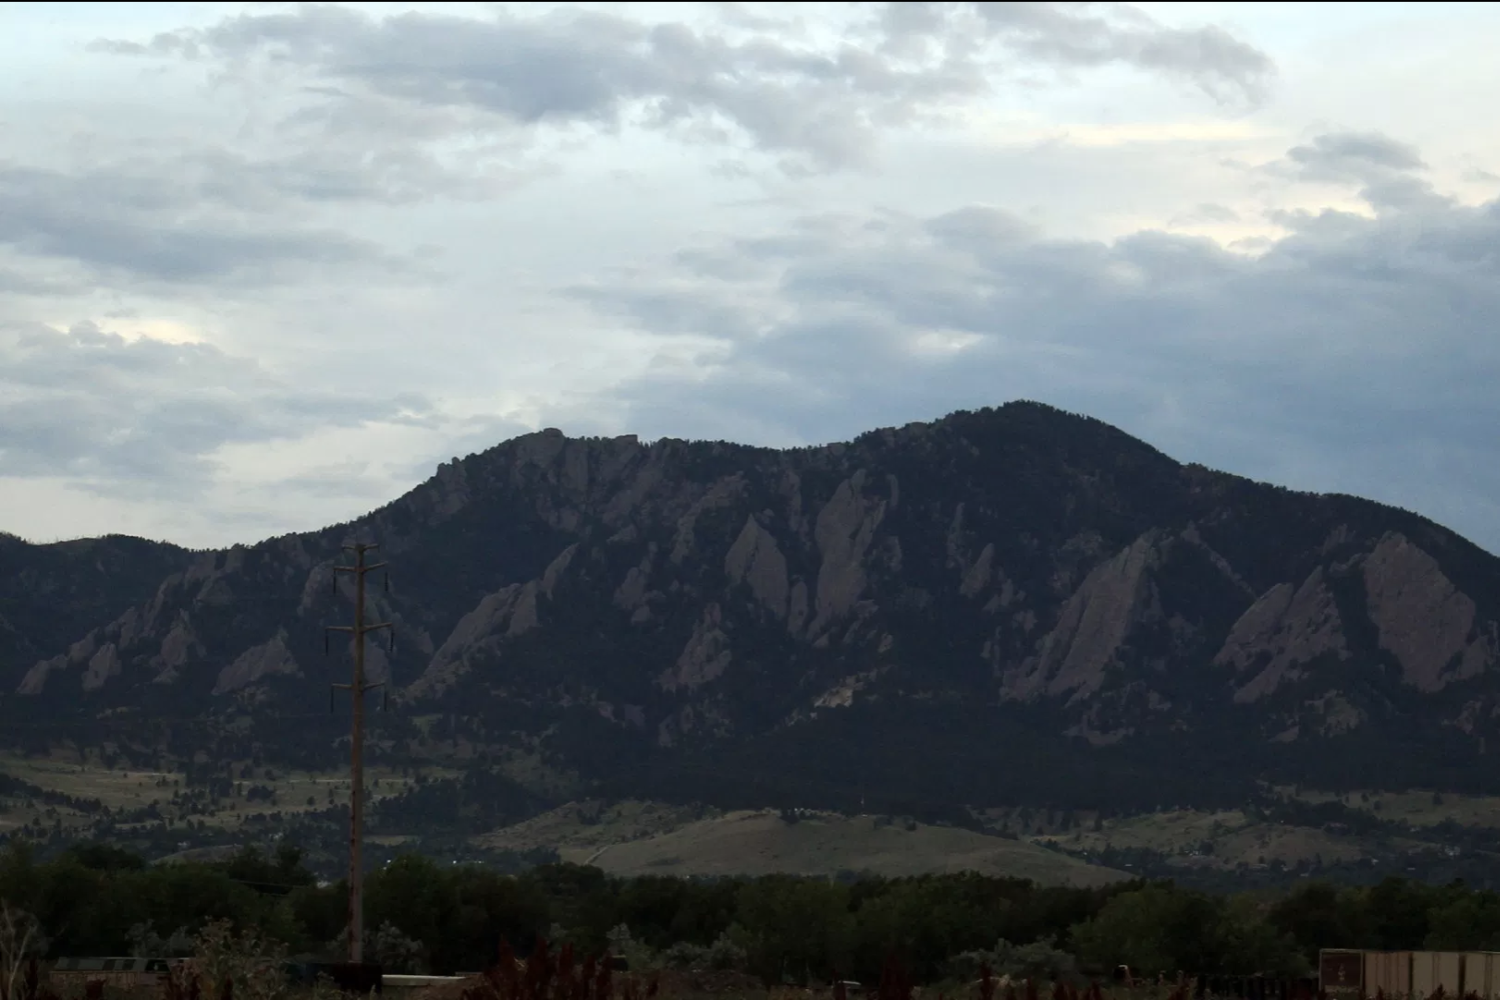 Across the street from the Valmont Coal Power Station is an open view of the flatirons. About 20 percent of forests in North America have been permanently demolished for agriculture or other uses.